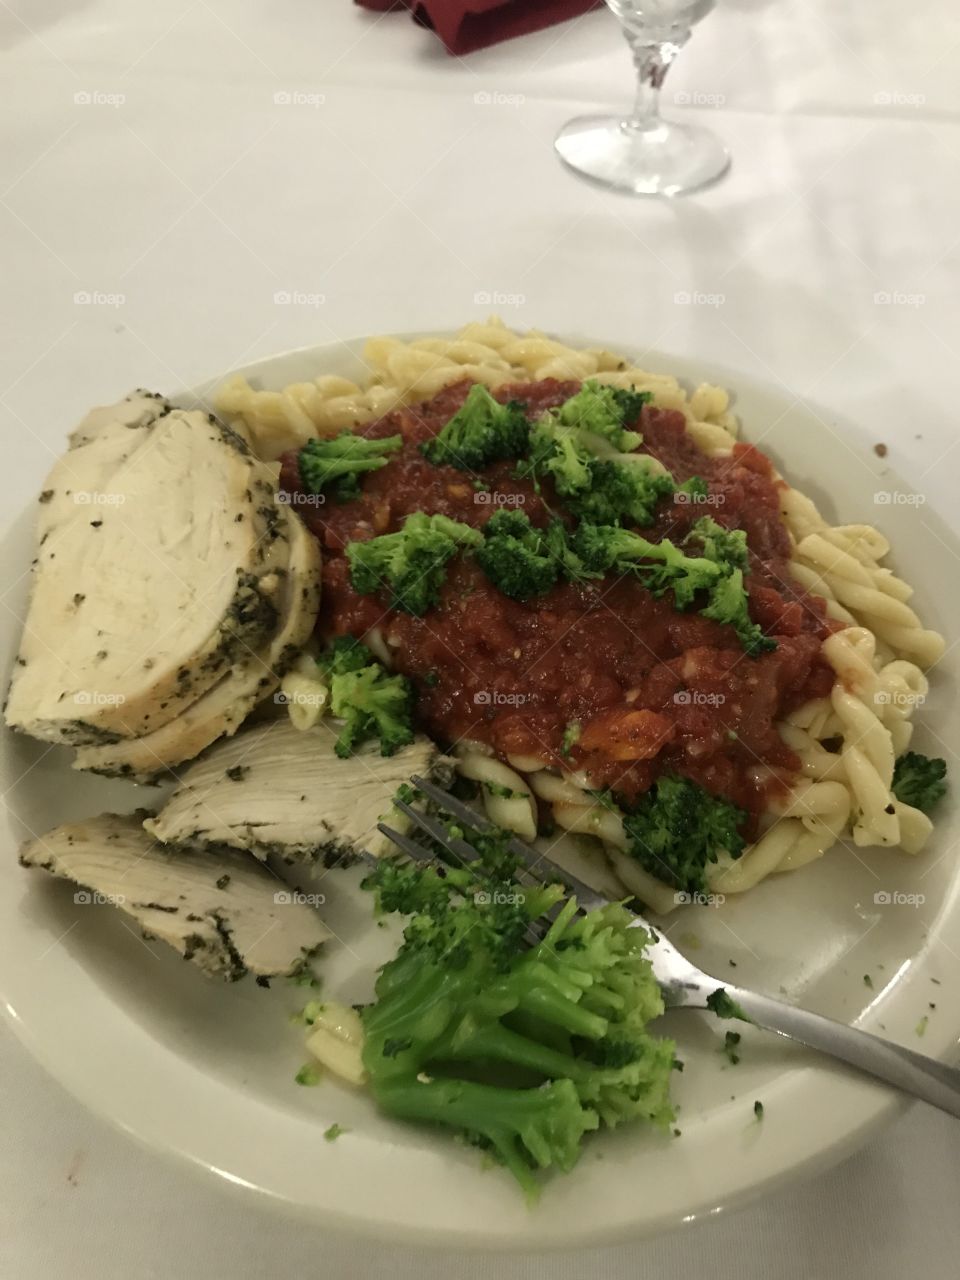 Delicious looking meal of pesto chicken over marinara pasta with broccoli florets, bright and colorful 